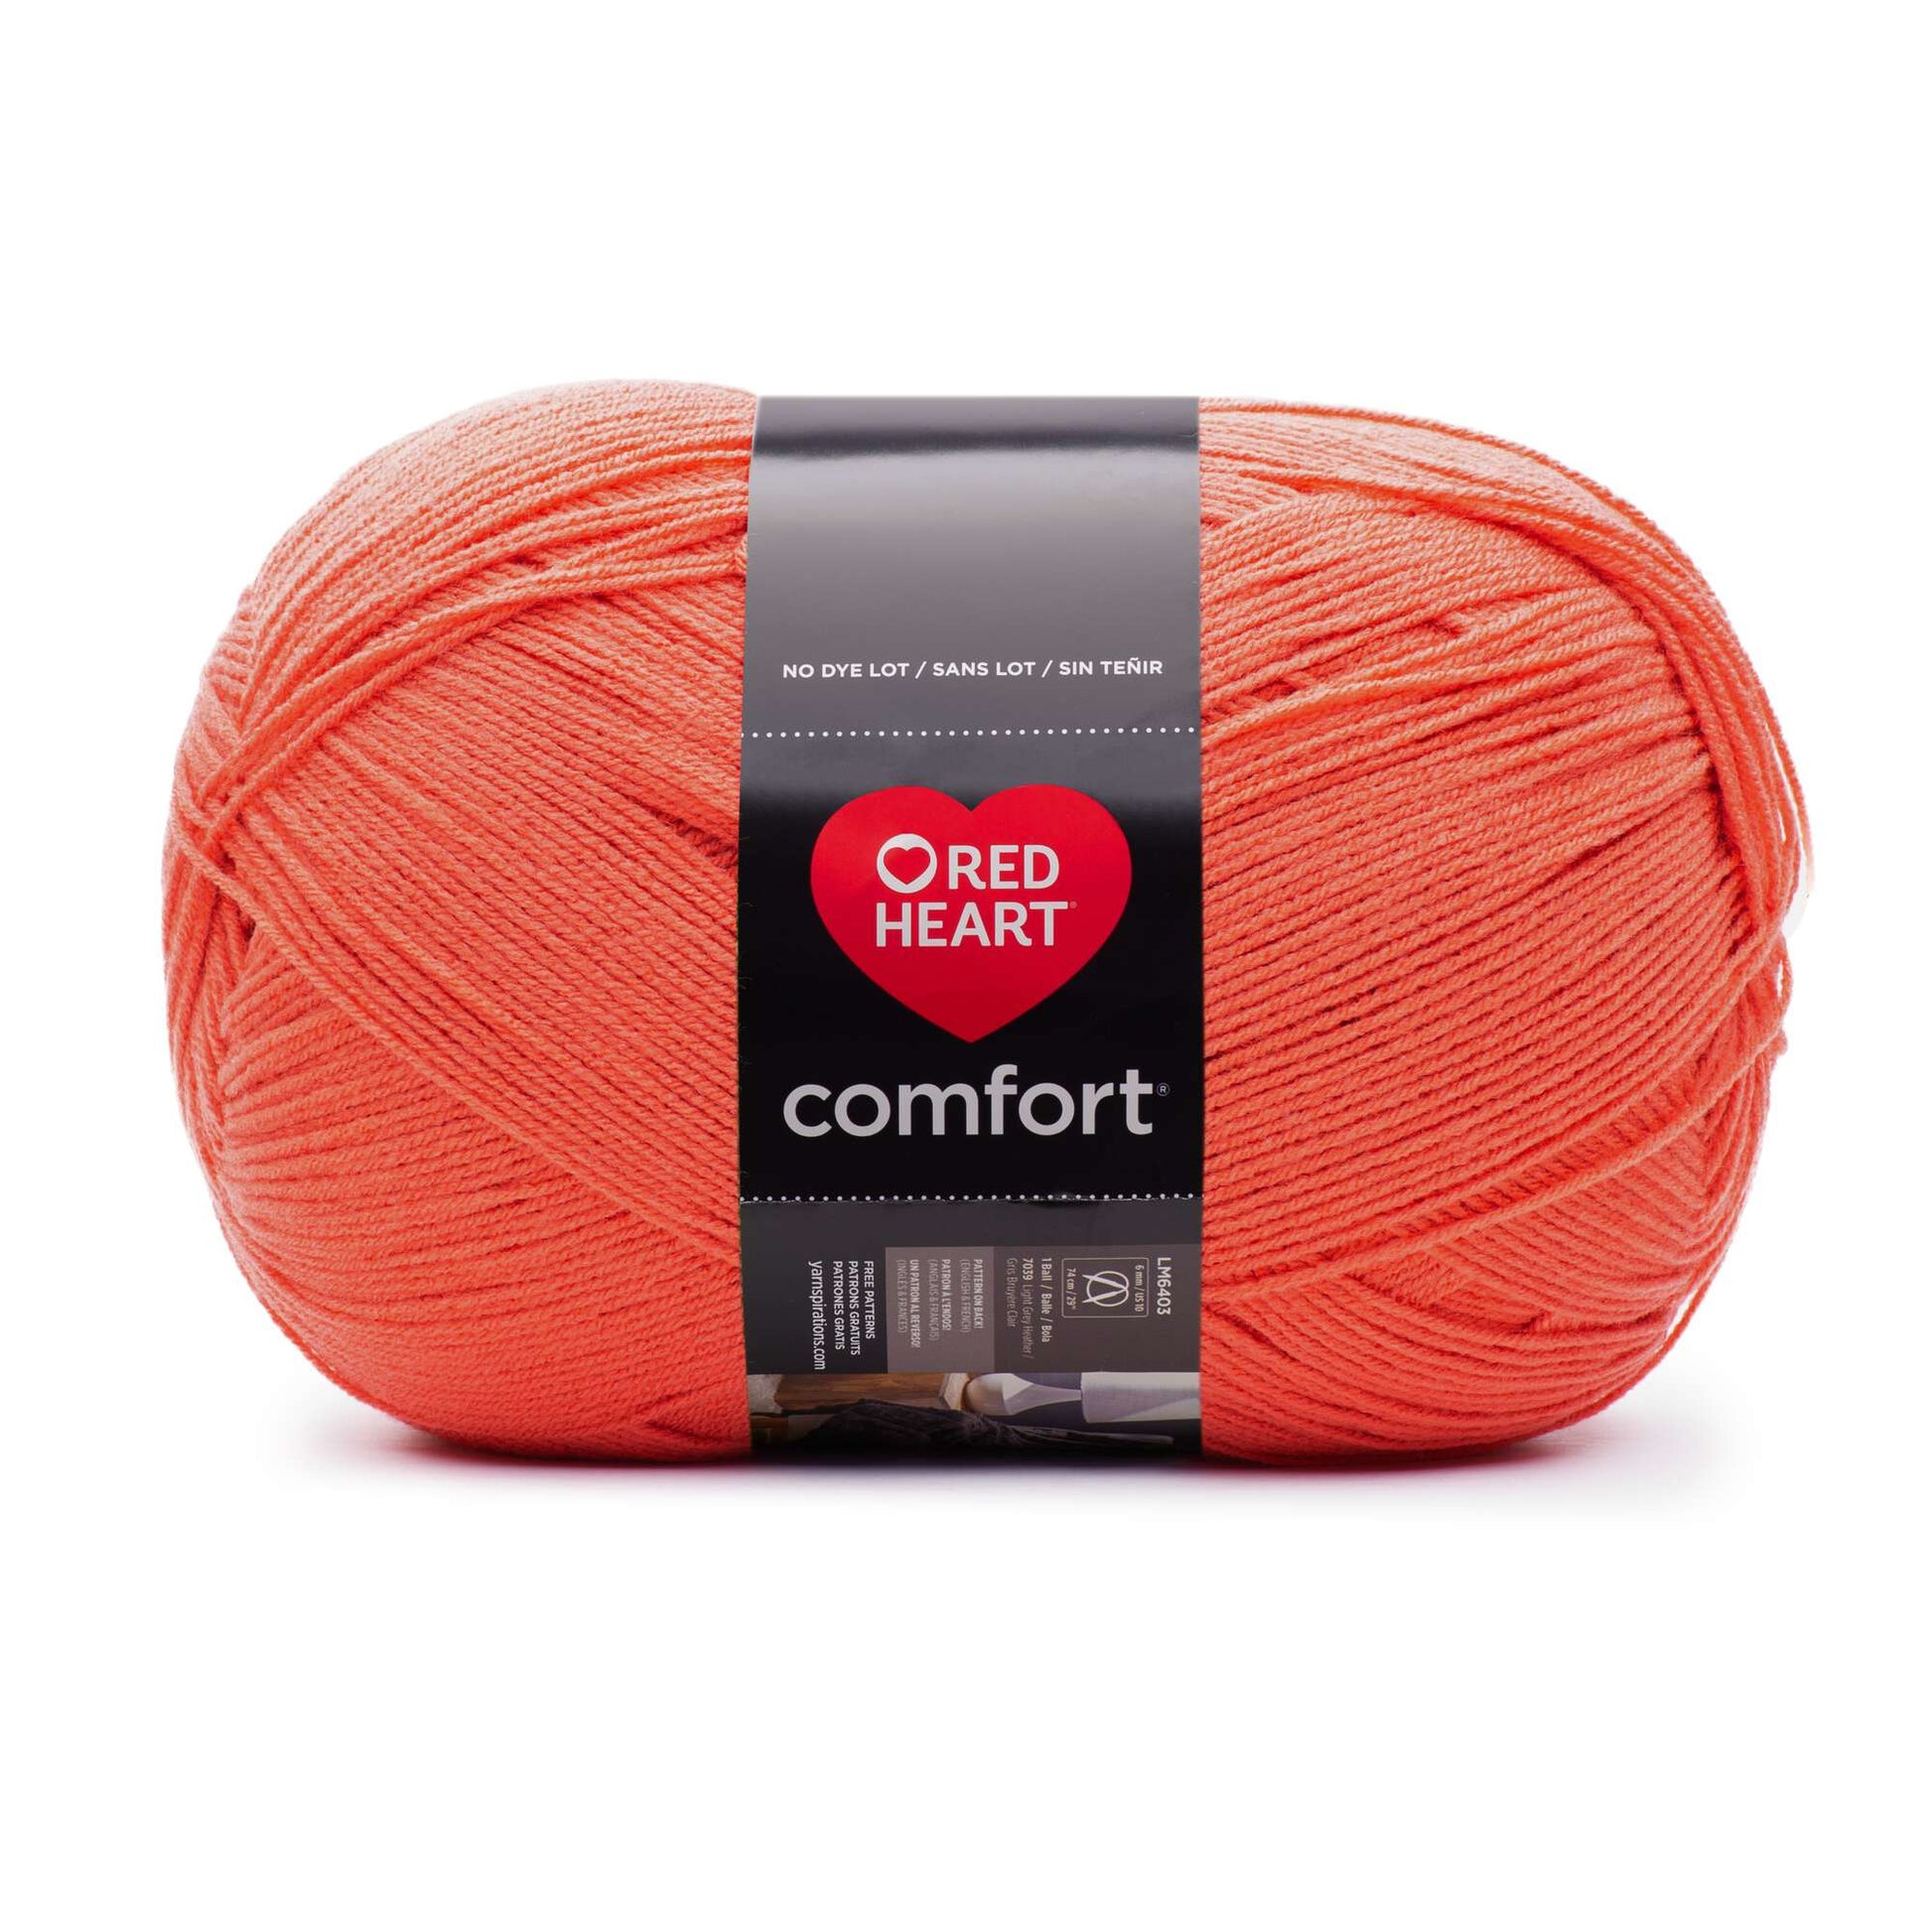 Red Heart Comfort Yarn (1000g/35.3oz) - Discontinued shades